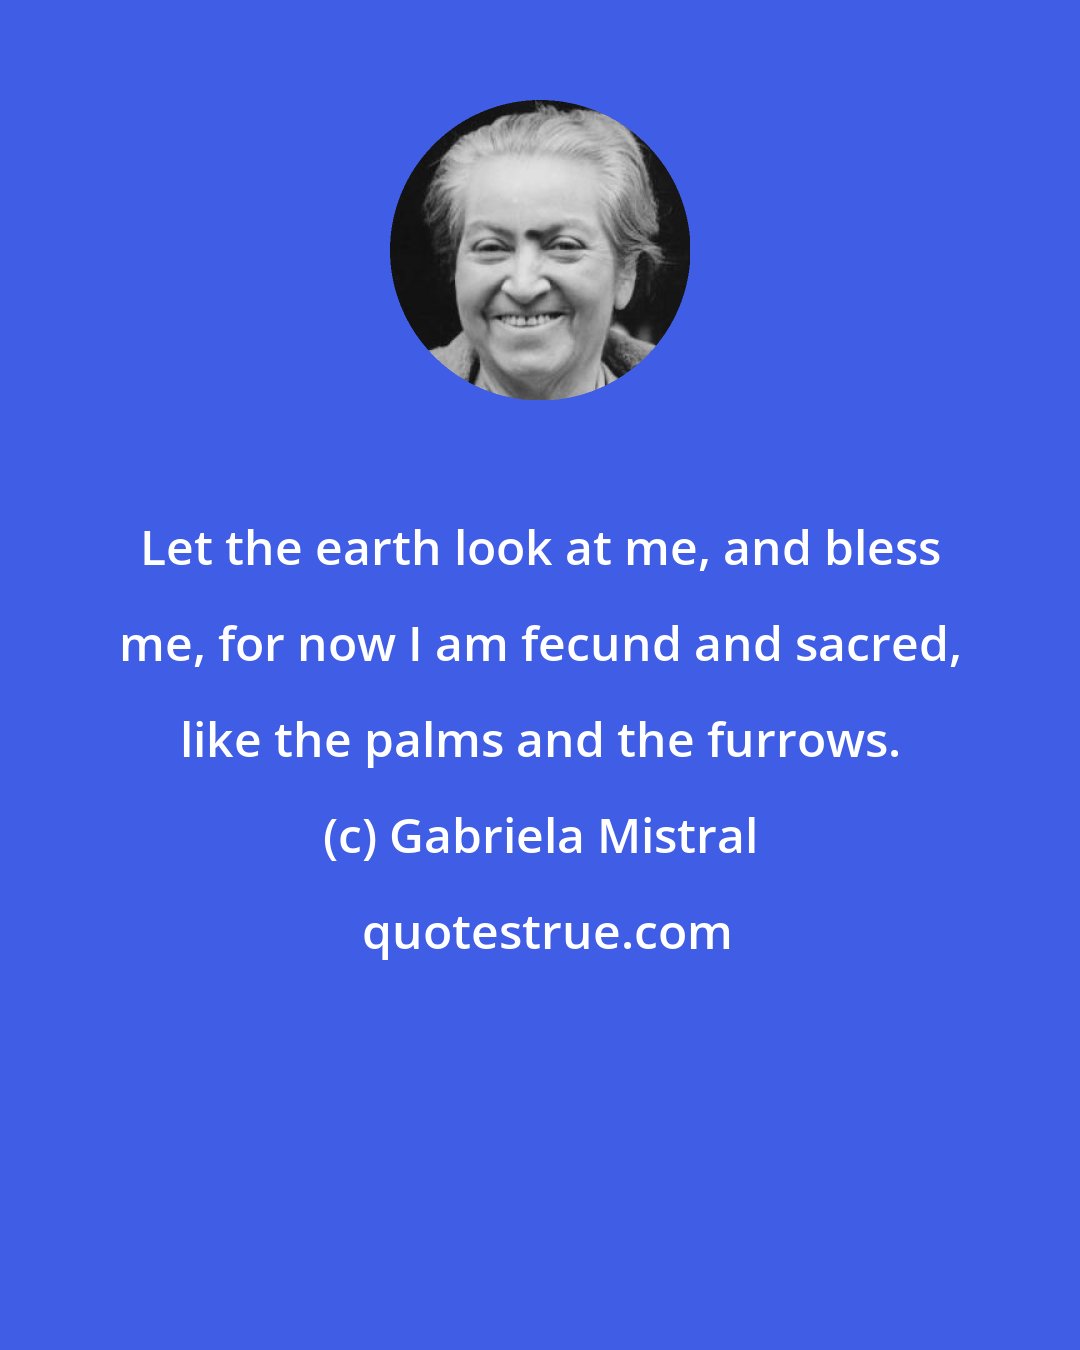 Gabriela Mistral: Let the earth look at me, and bless me, for now I am fecund and sacred, like the palms and the furrows.